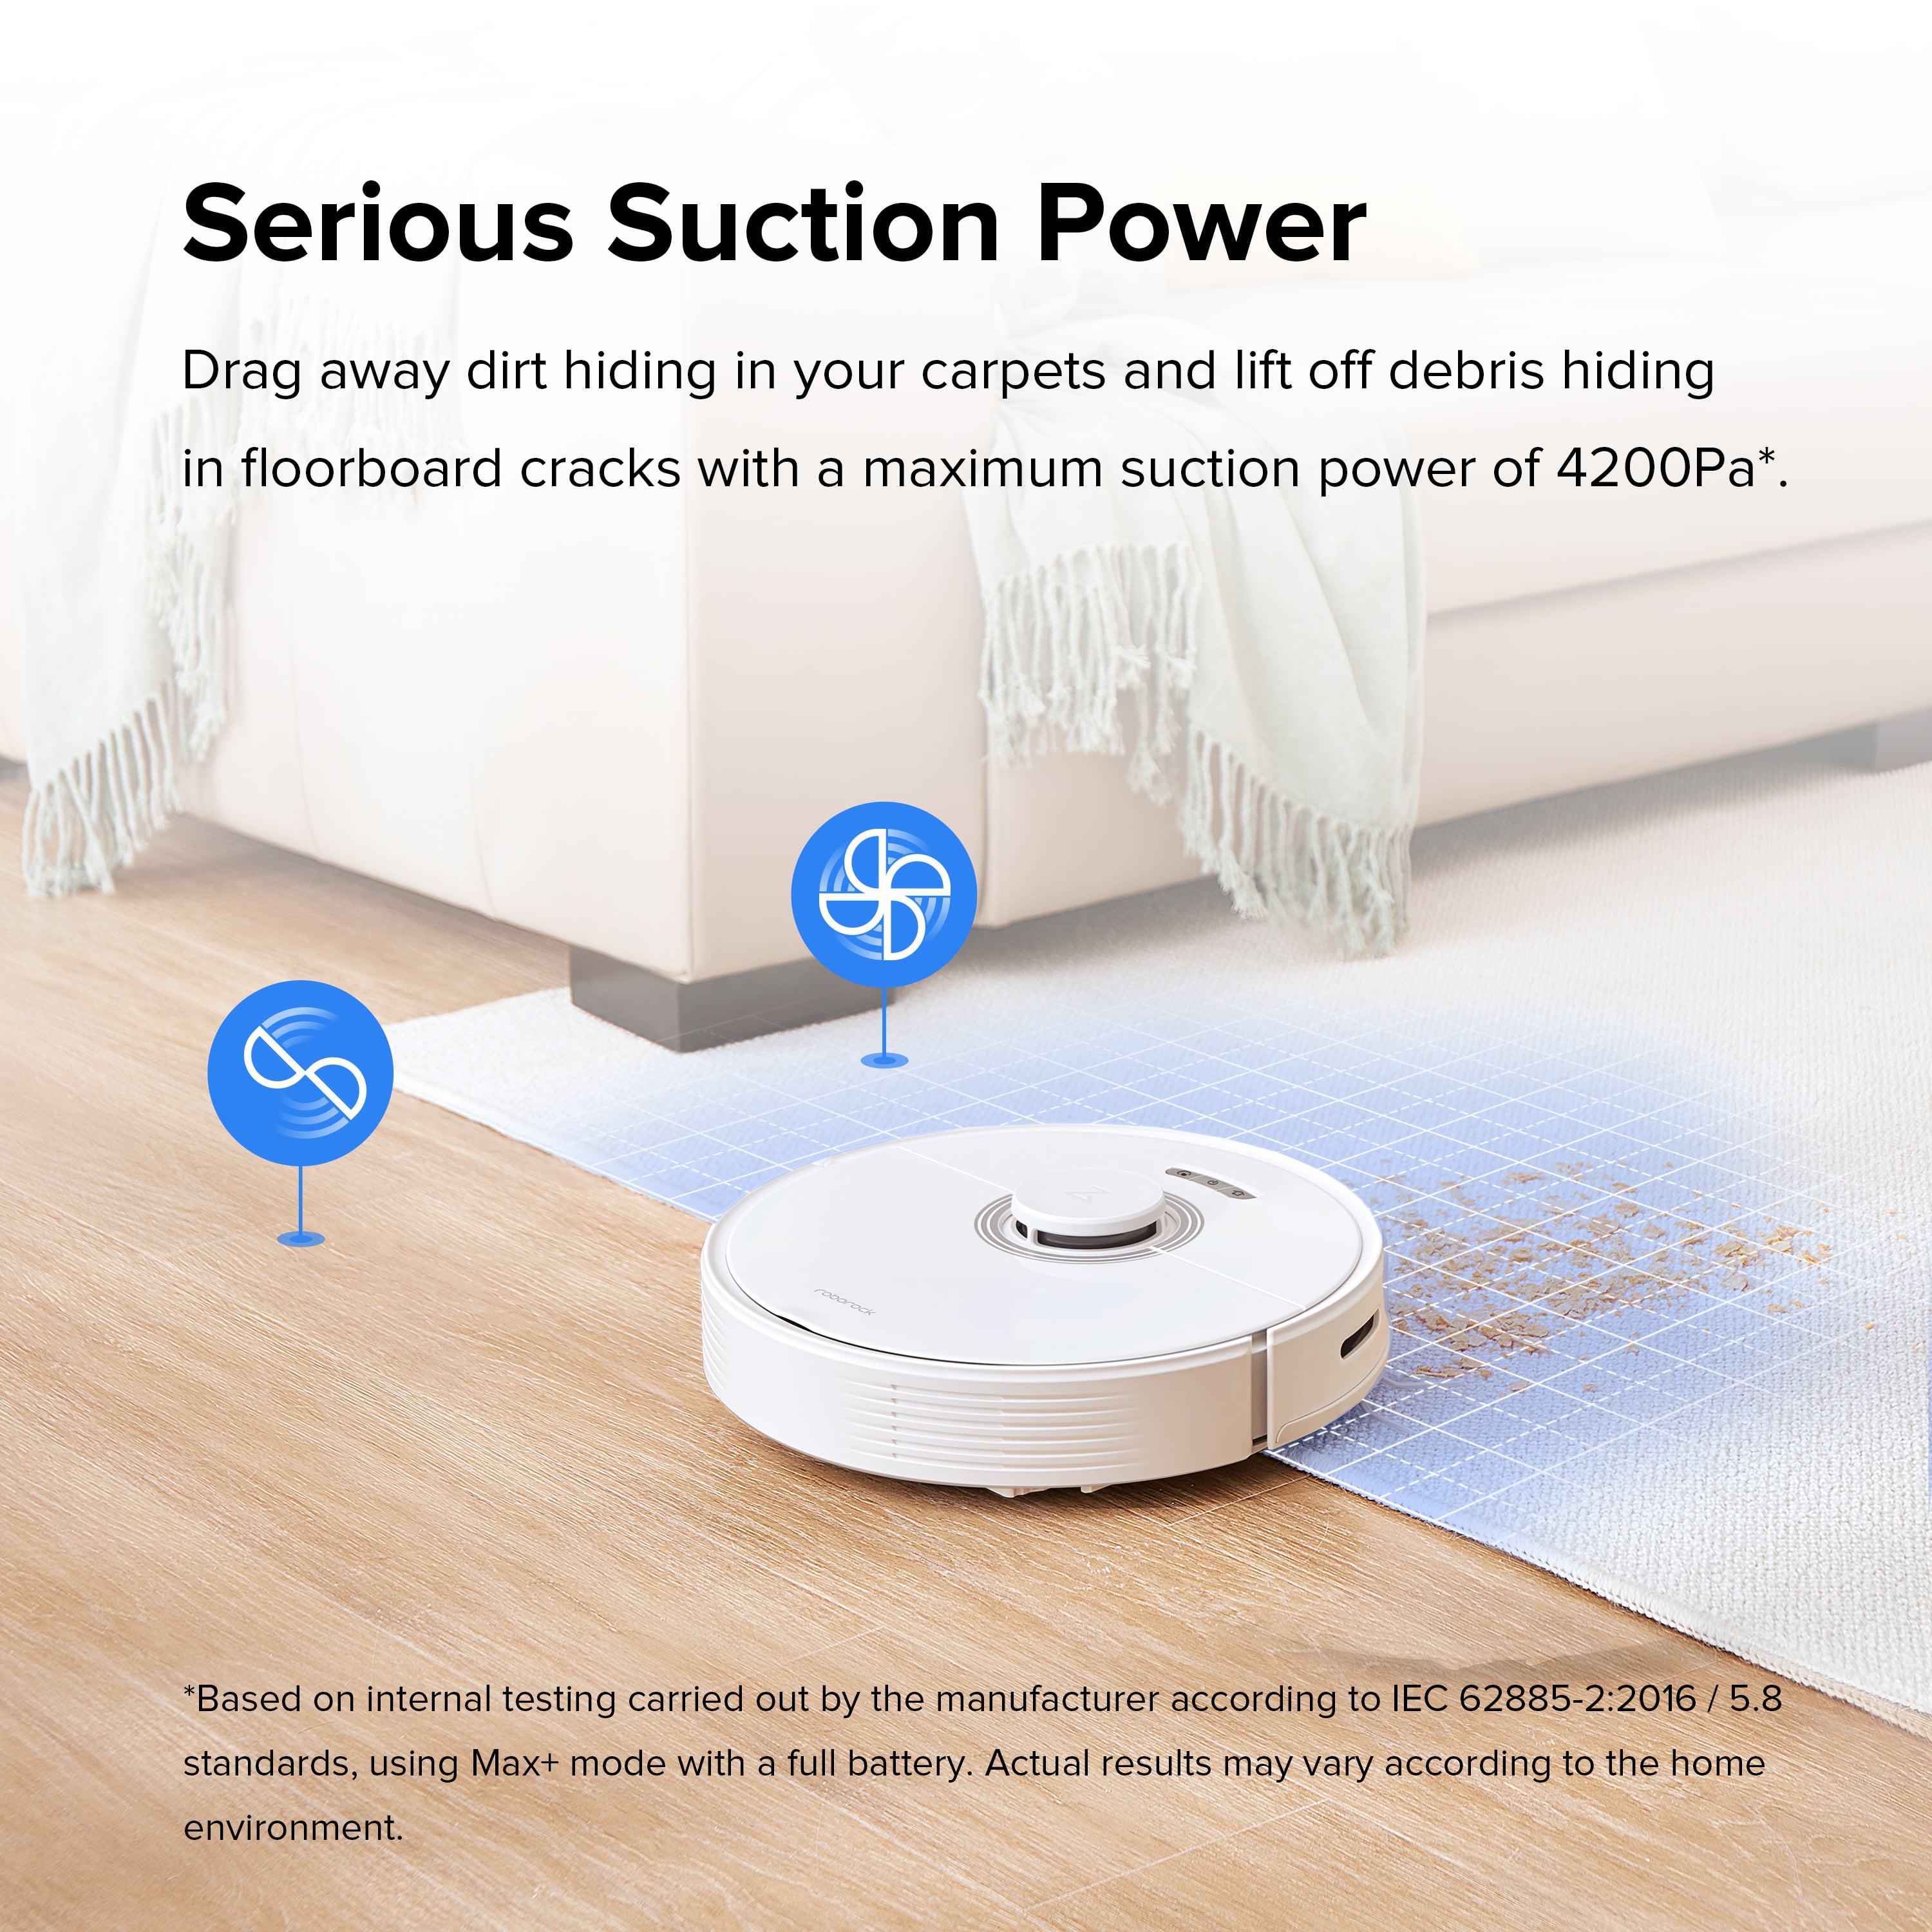 Roborock Q7 Max Robot Vacuum 4200 Pa Sution Power 3D Mapping LDS Smart Home  ,Upgrade of S5 Max Robot Vacuum Cleaner